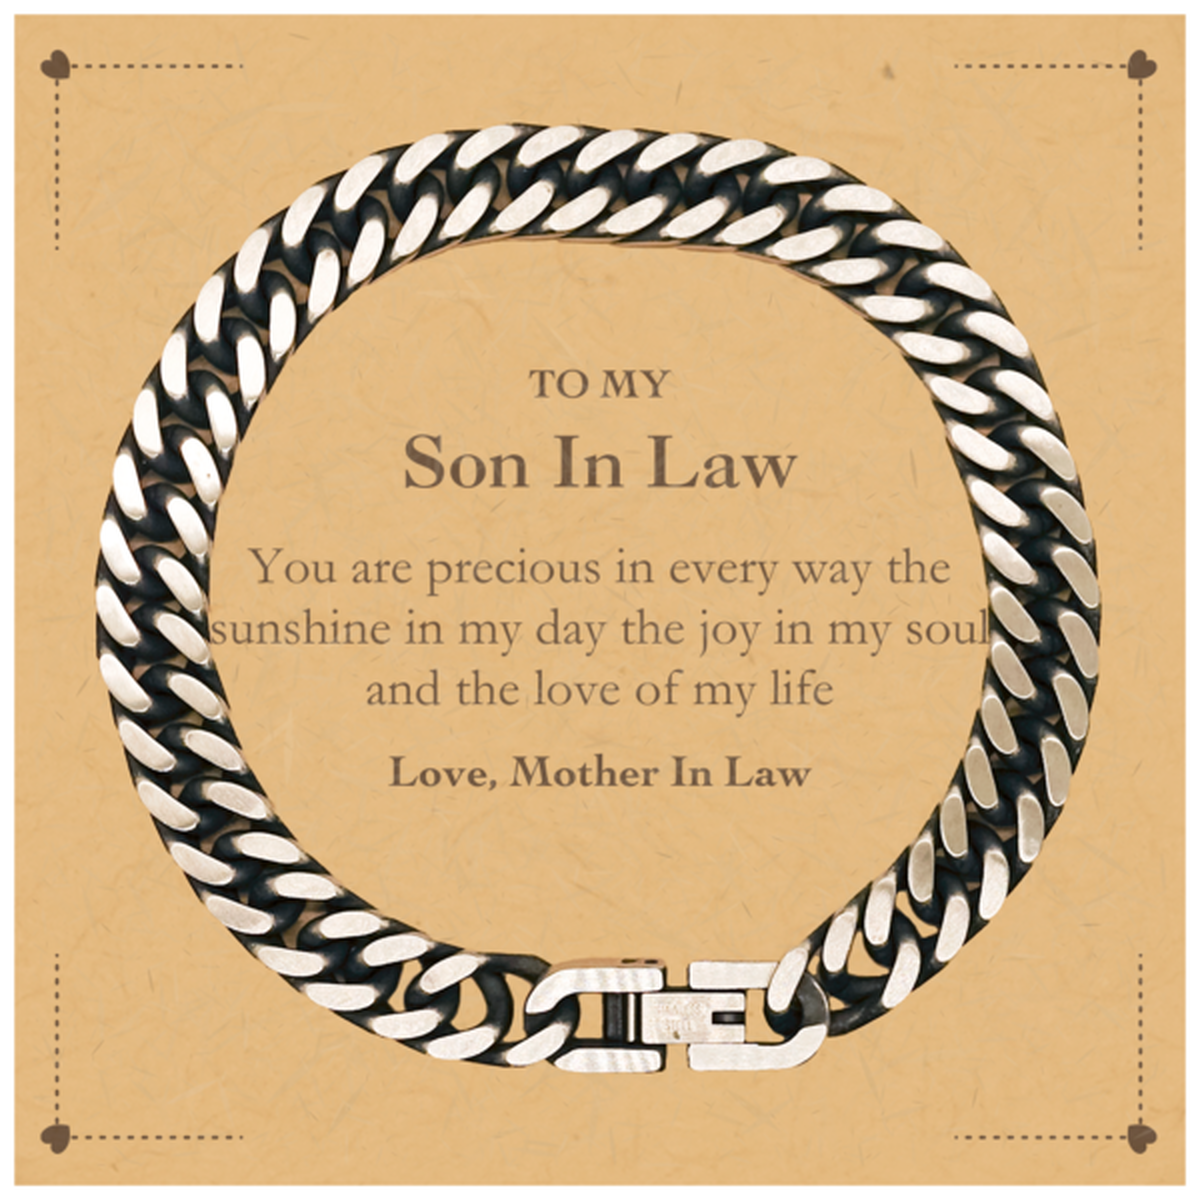 Graduation Gifts for Son In Law Cuban Link Chain Bracelet Present from Mother In Law, Christmas Son In Law Birthday Gifts Son In Law You are precious in every way the sunshine in my day. Love, Mother In Law